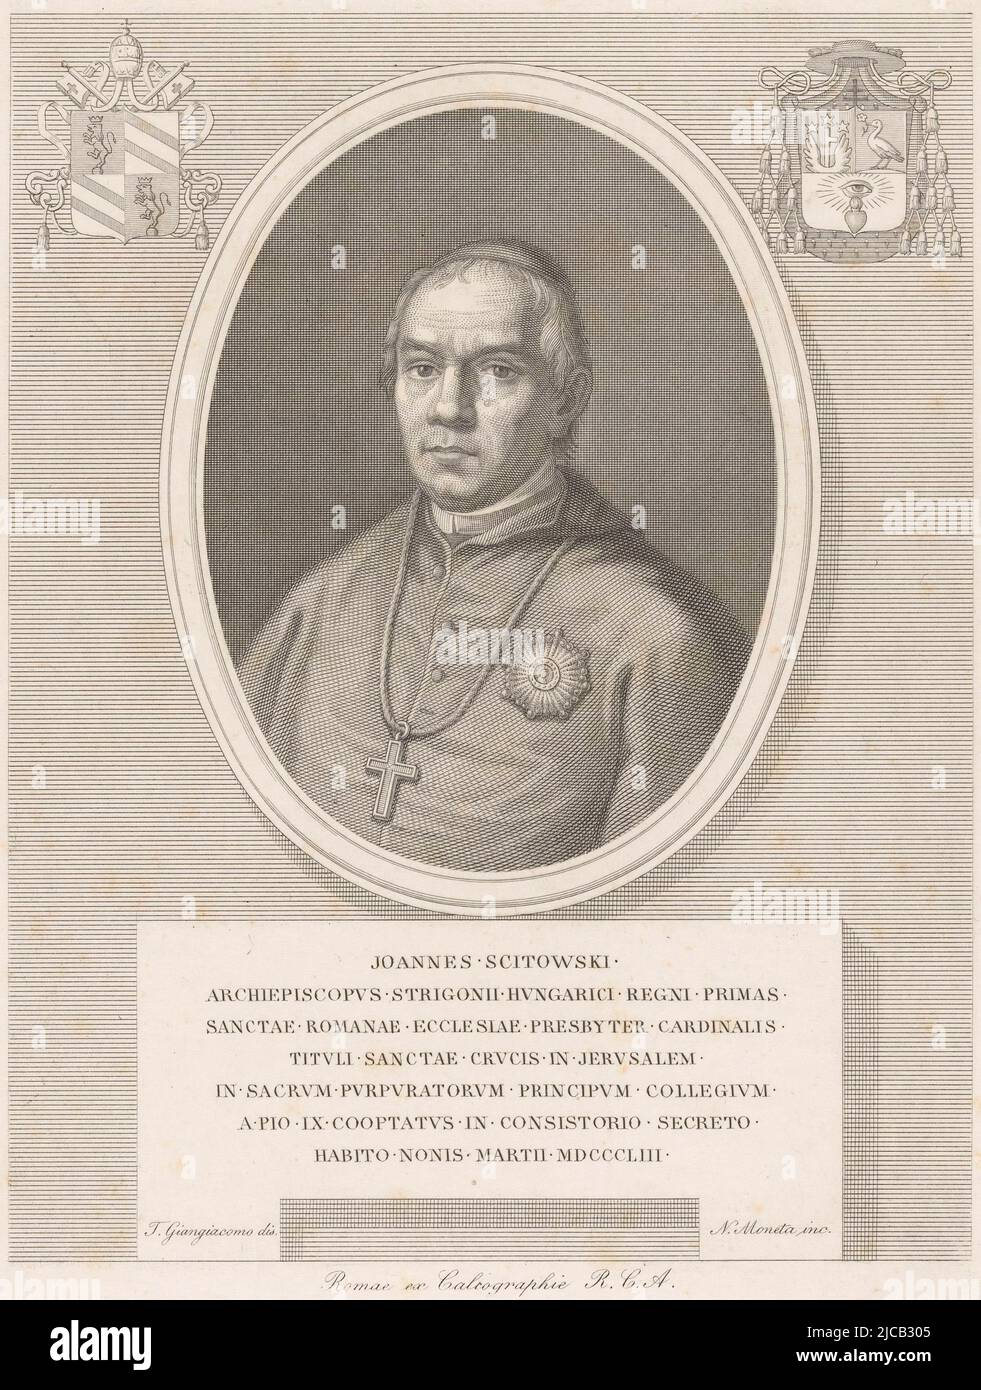 Portrait of Cardinal Jnos Scitovszky, print maker: Nicola Moneta, (mentioned on object), intermediary draughtsman: Tertulliano Giangiacomo, (mentioned on object), printer: Calcographia R.C.A., (mentioned on object), print maker: Italy, intermediary draughtsman: Italy, printer: Rome, in or after 1853, paper, engraving, h 210 mm - w 162 mm Stock Photo